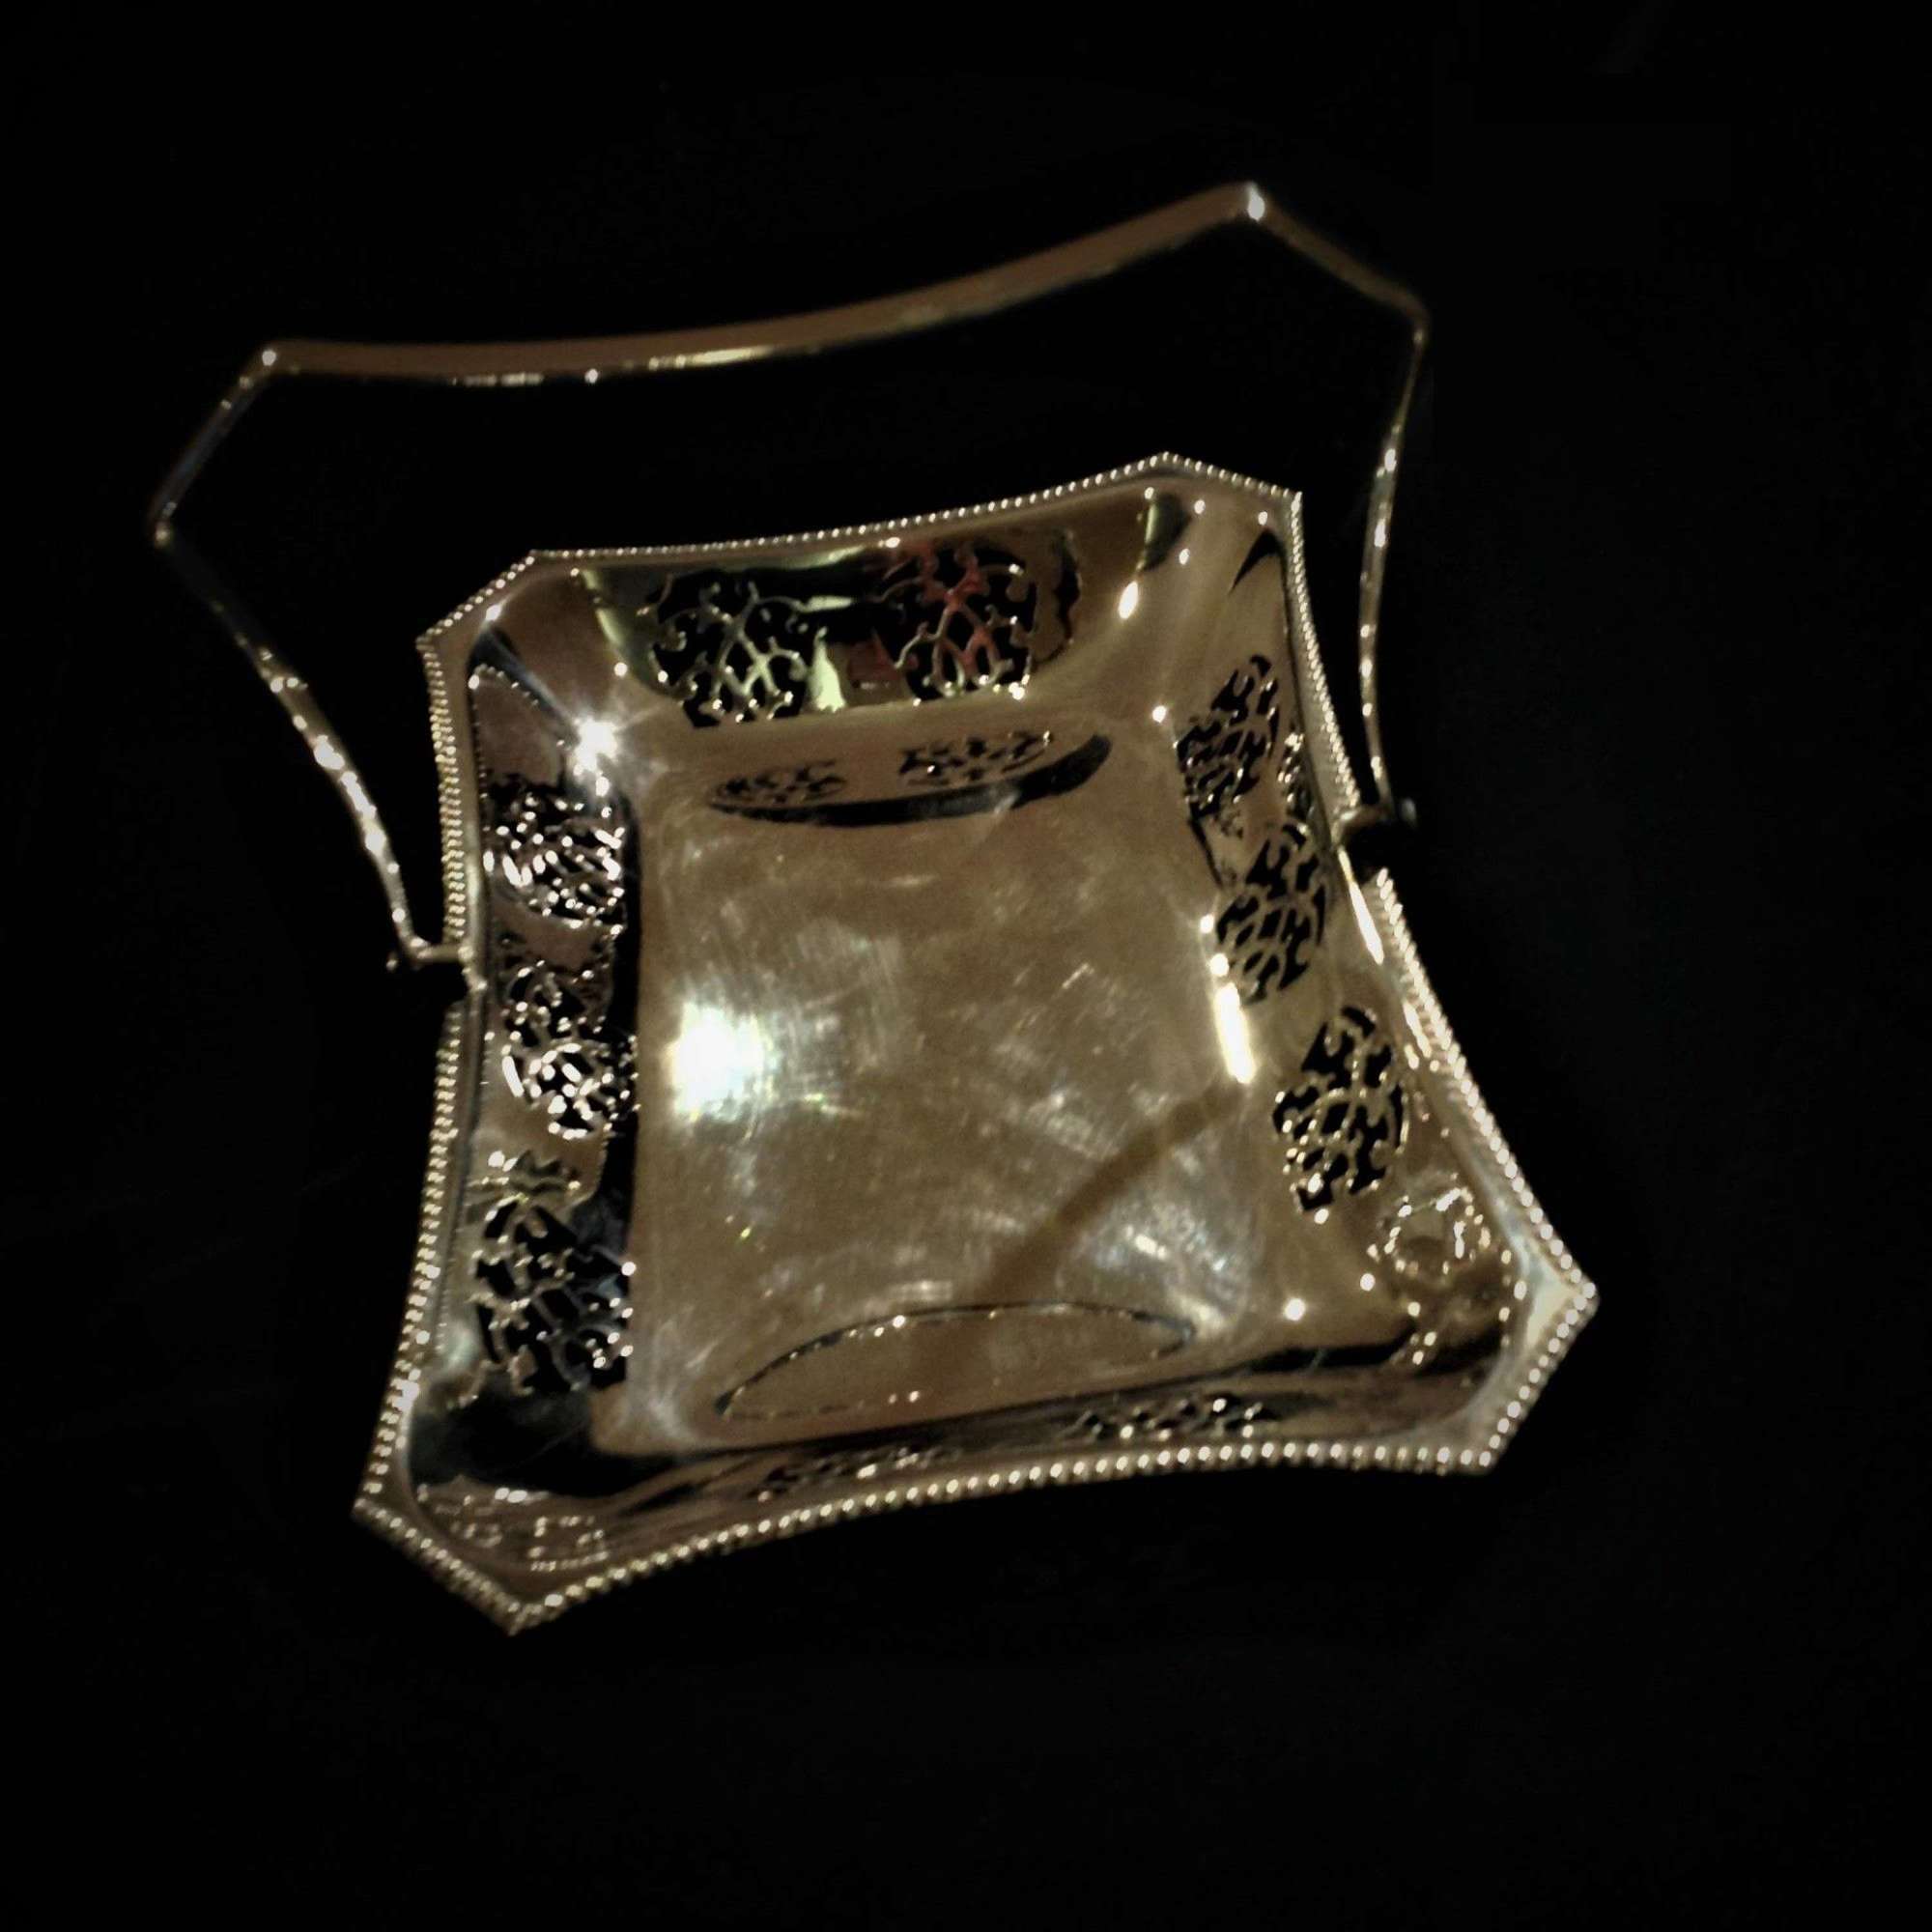 Decorative silver plated swing-handled basket